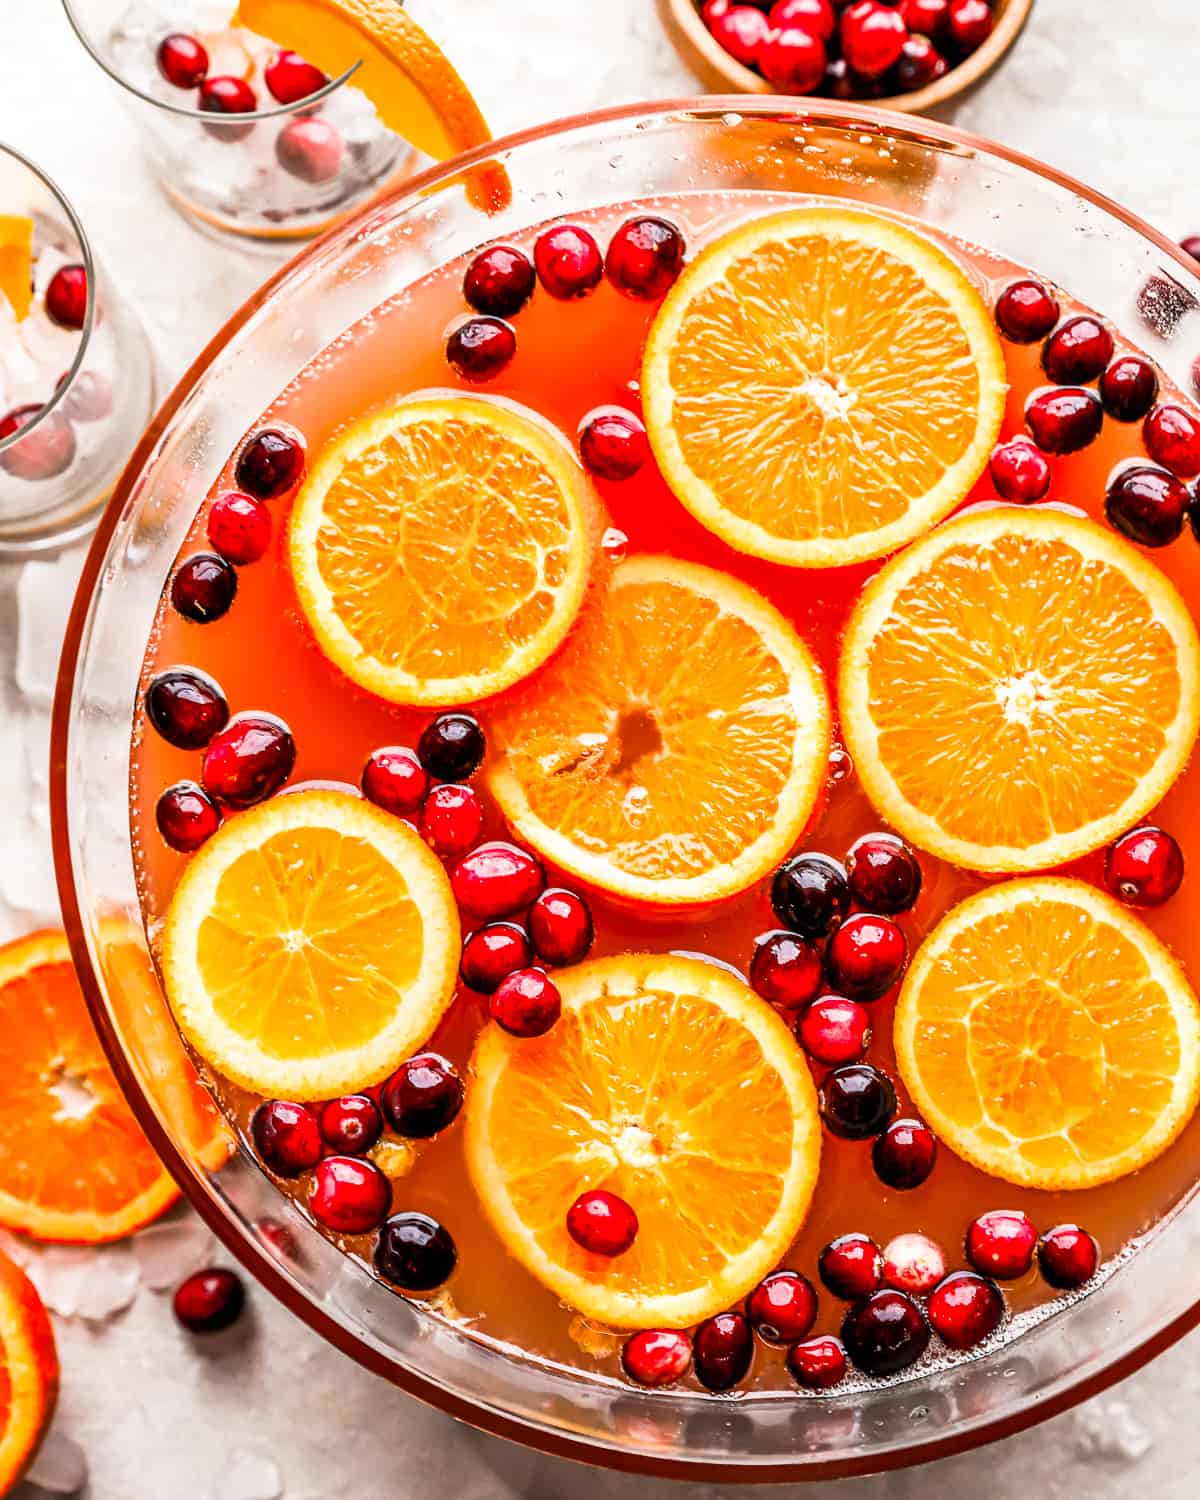 A bowl filled with oranges and cranberries.